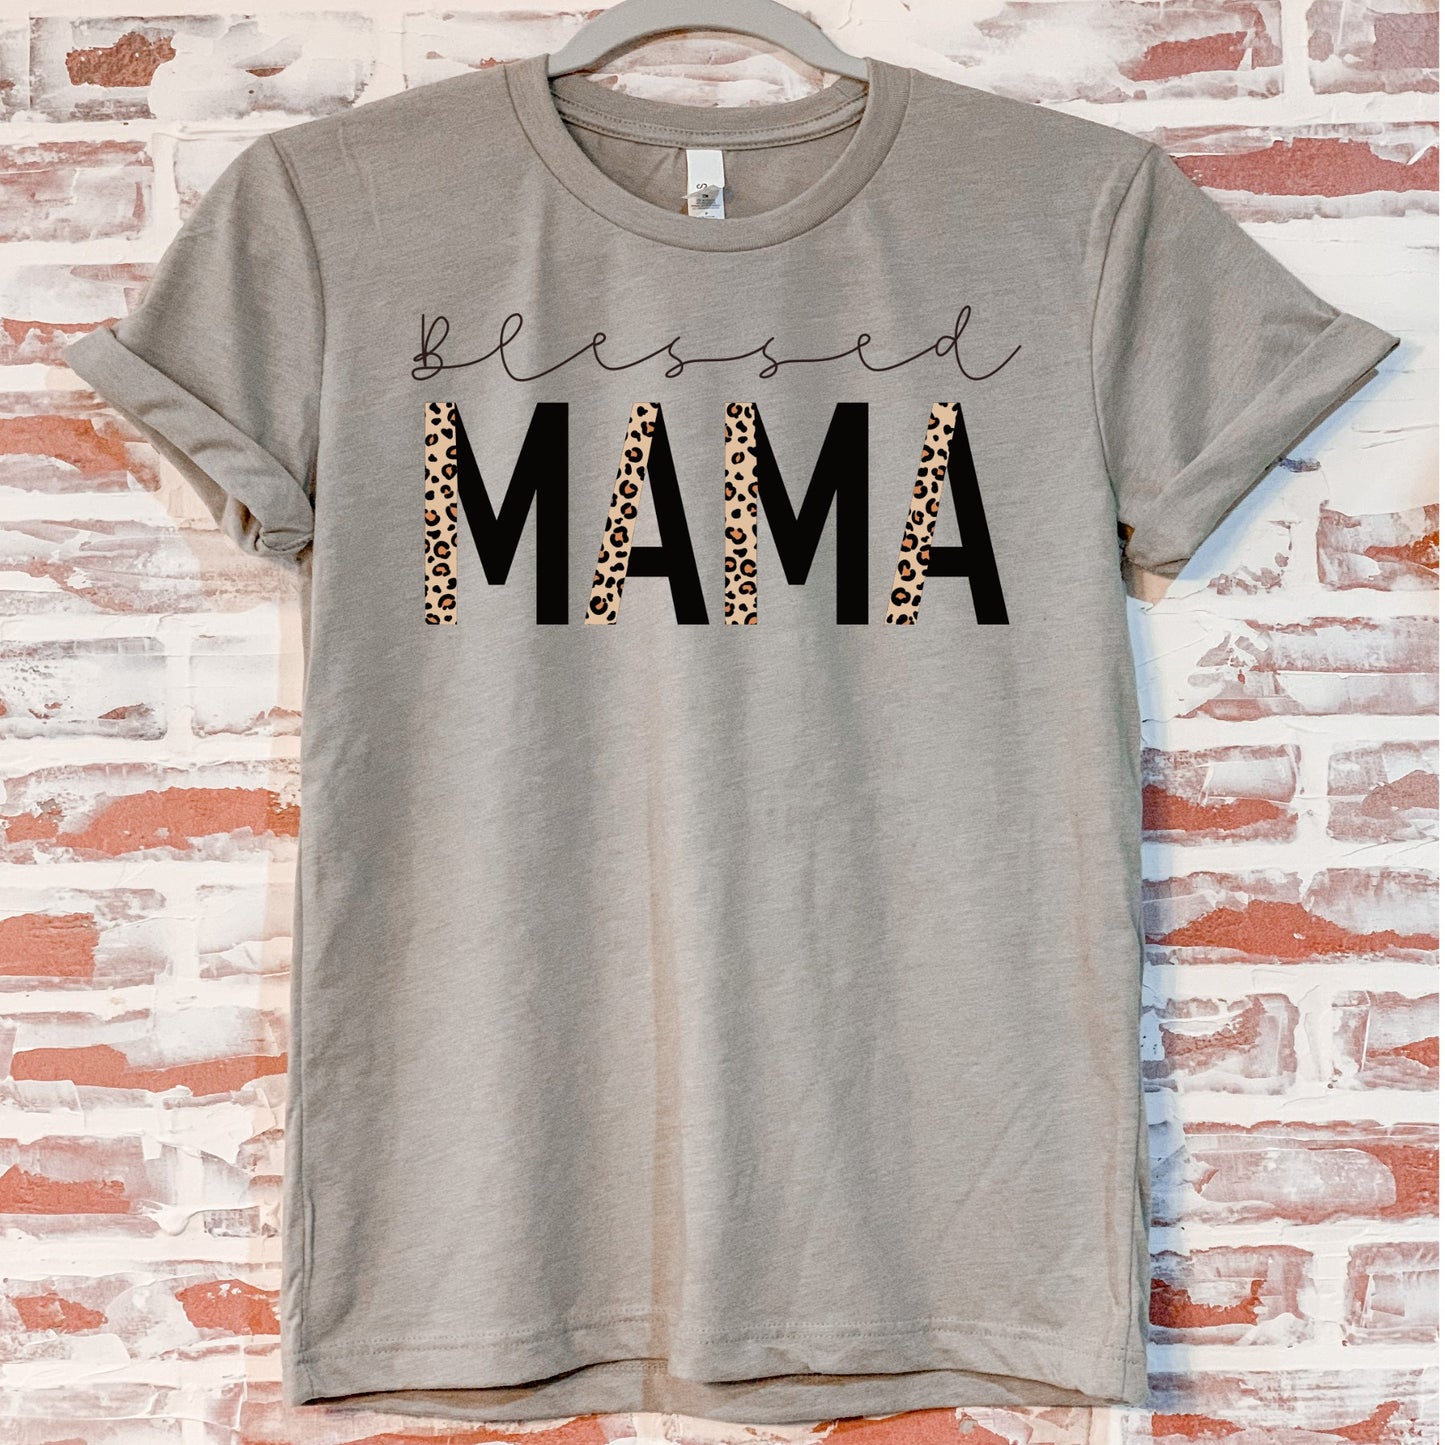 Leopard Blessed Mama tee